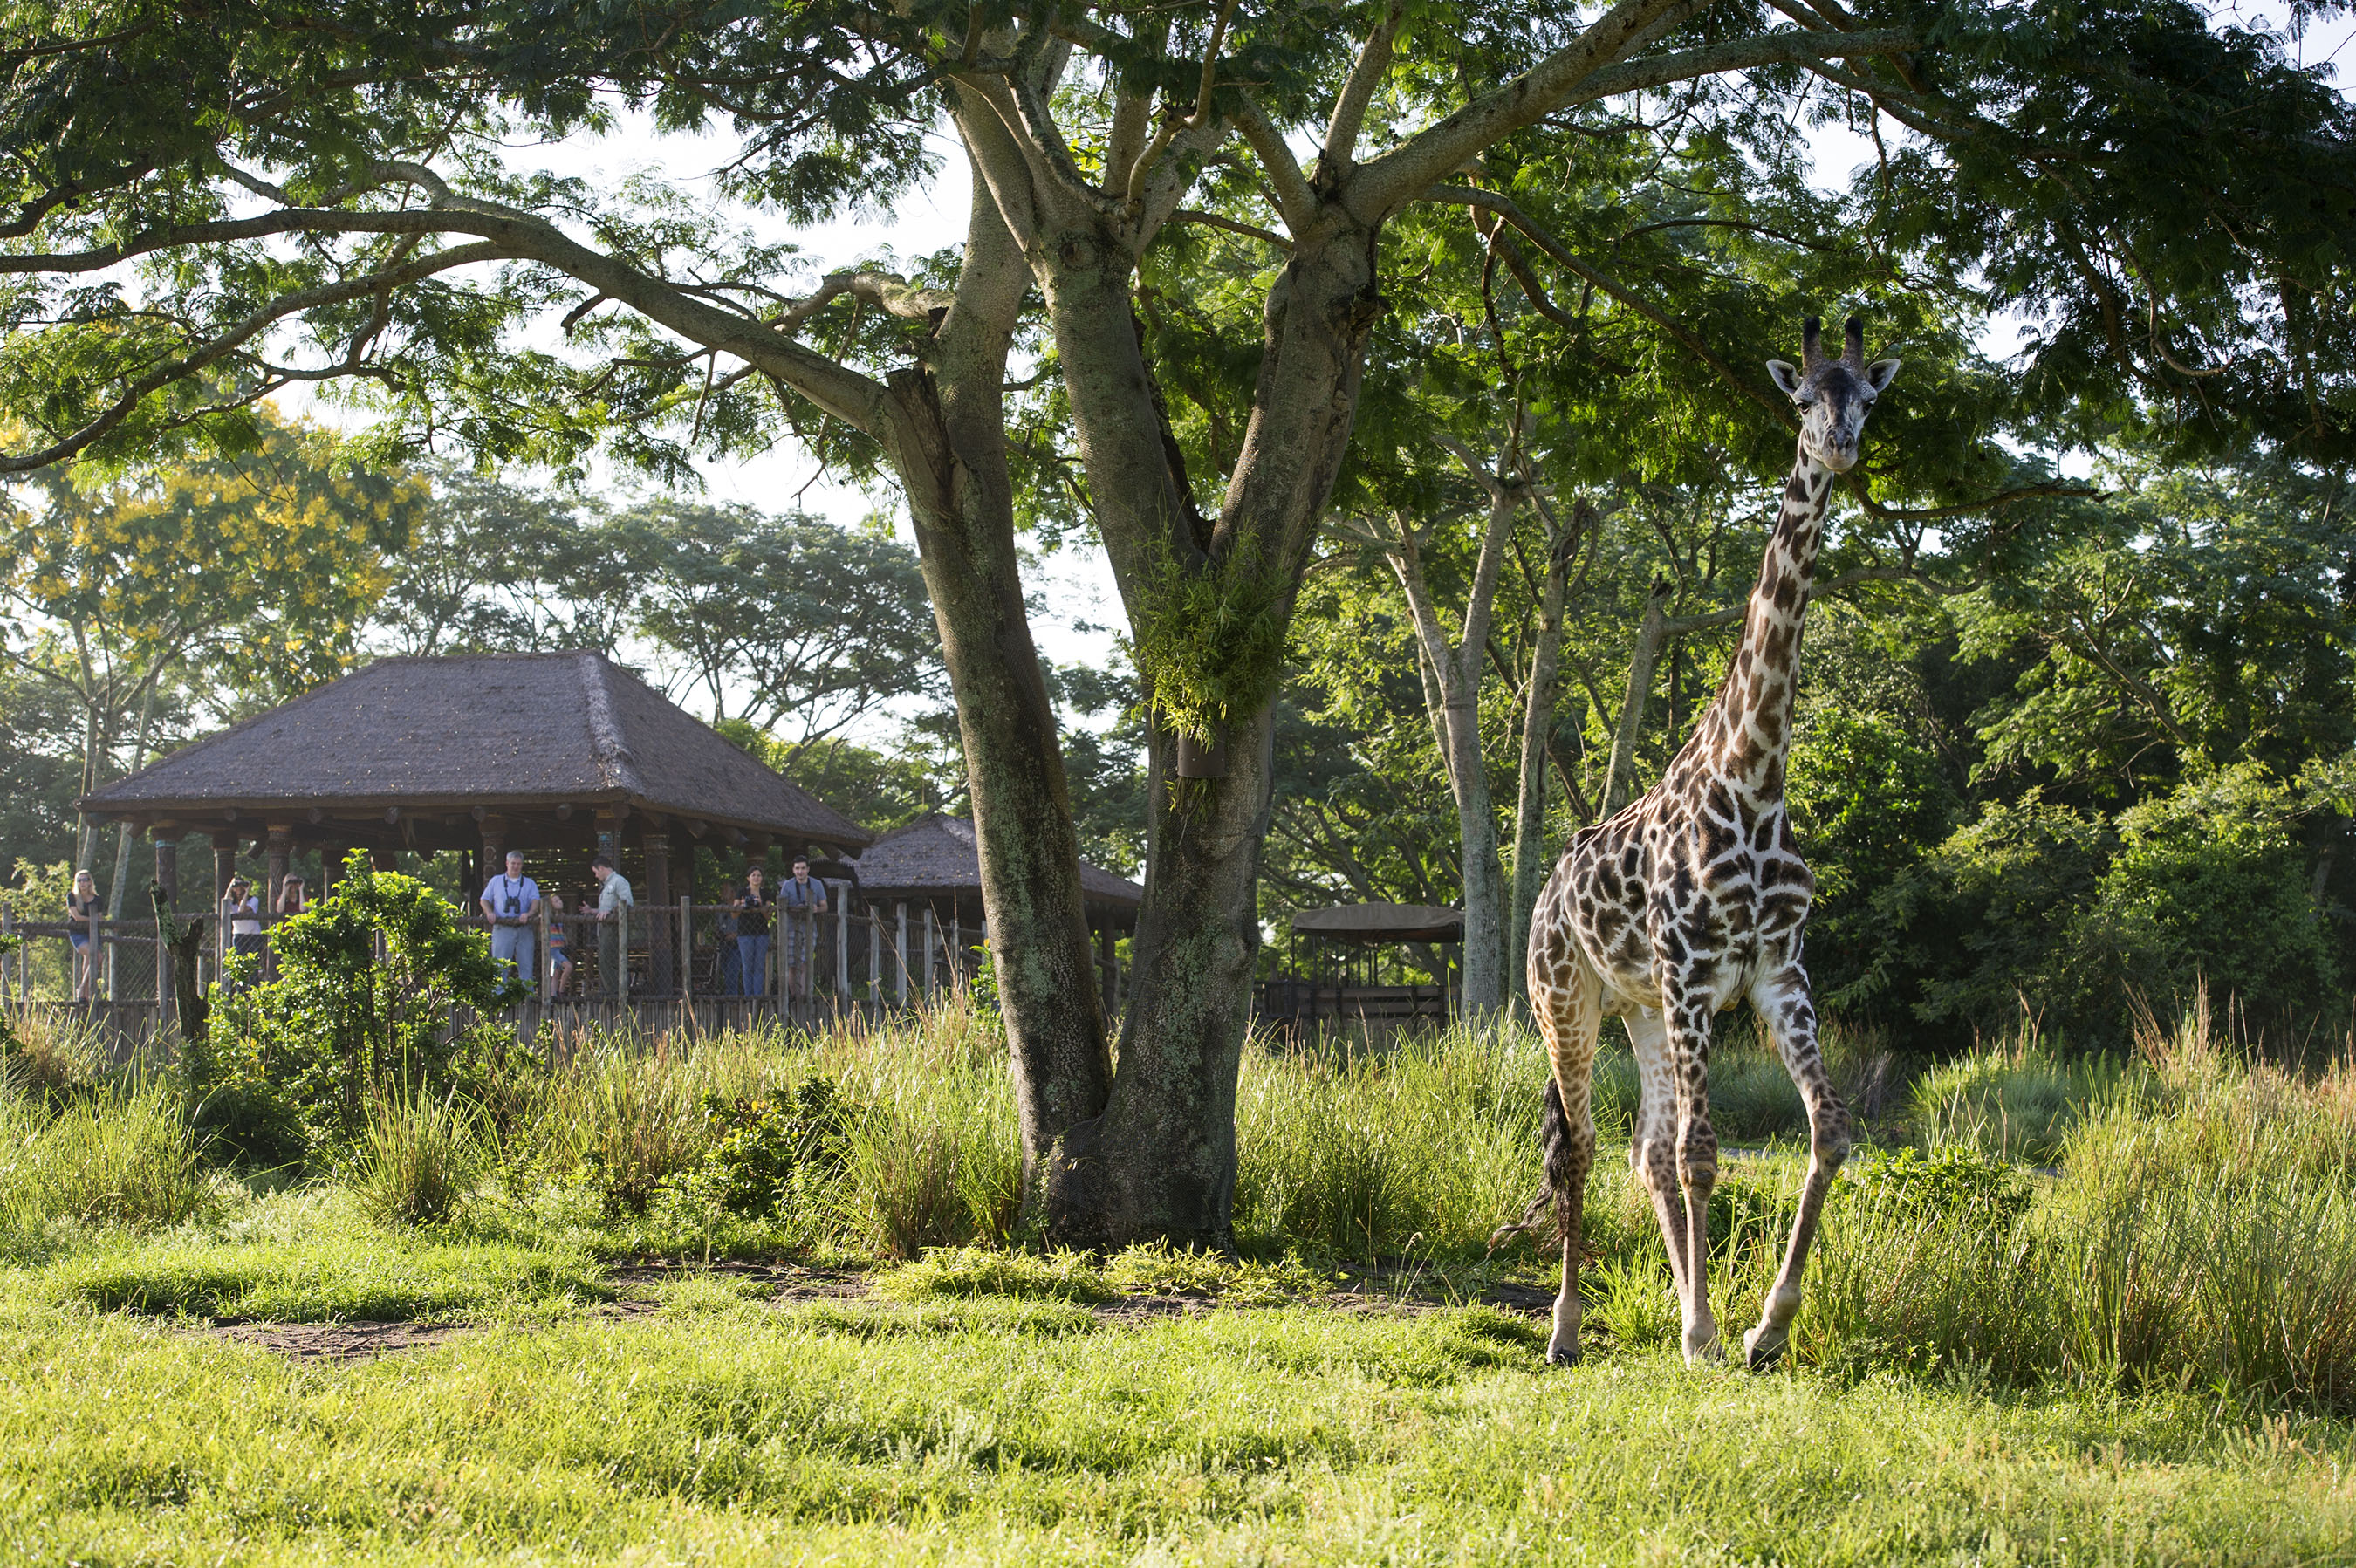 “Savor the Savanna” at Disney’s Animal Kingdom Offers Private Tour, Exclusive Viewing and African-Inspired Culinary Delights